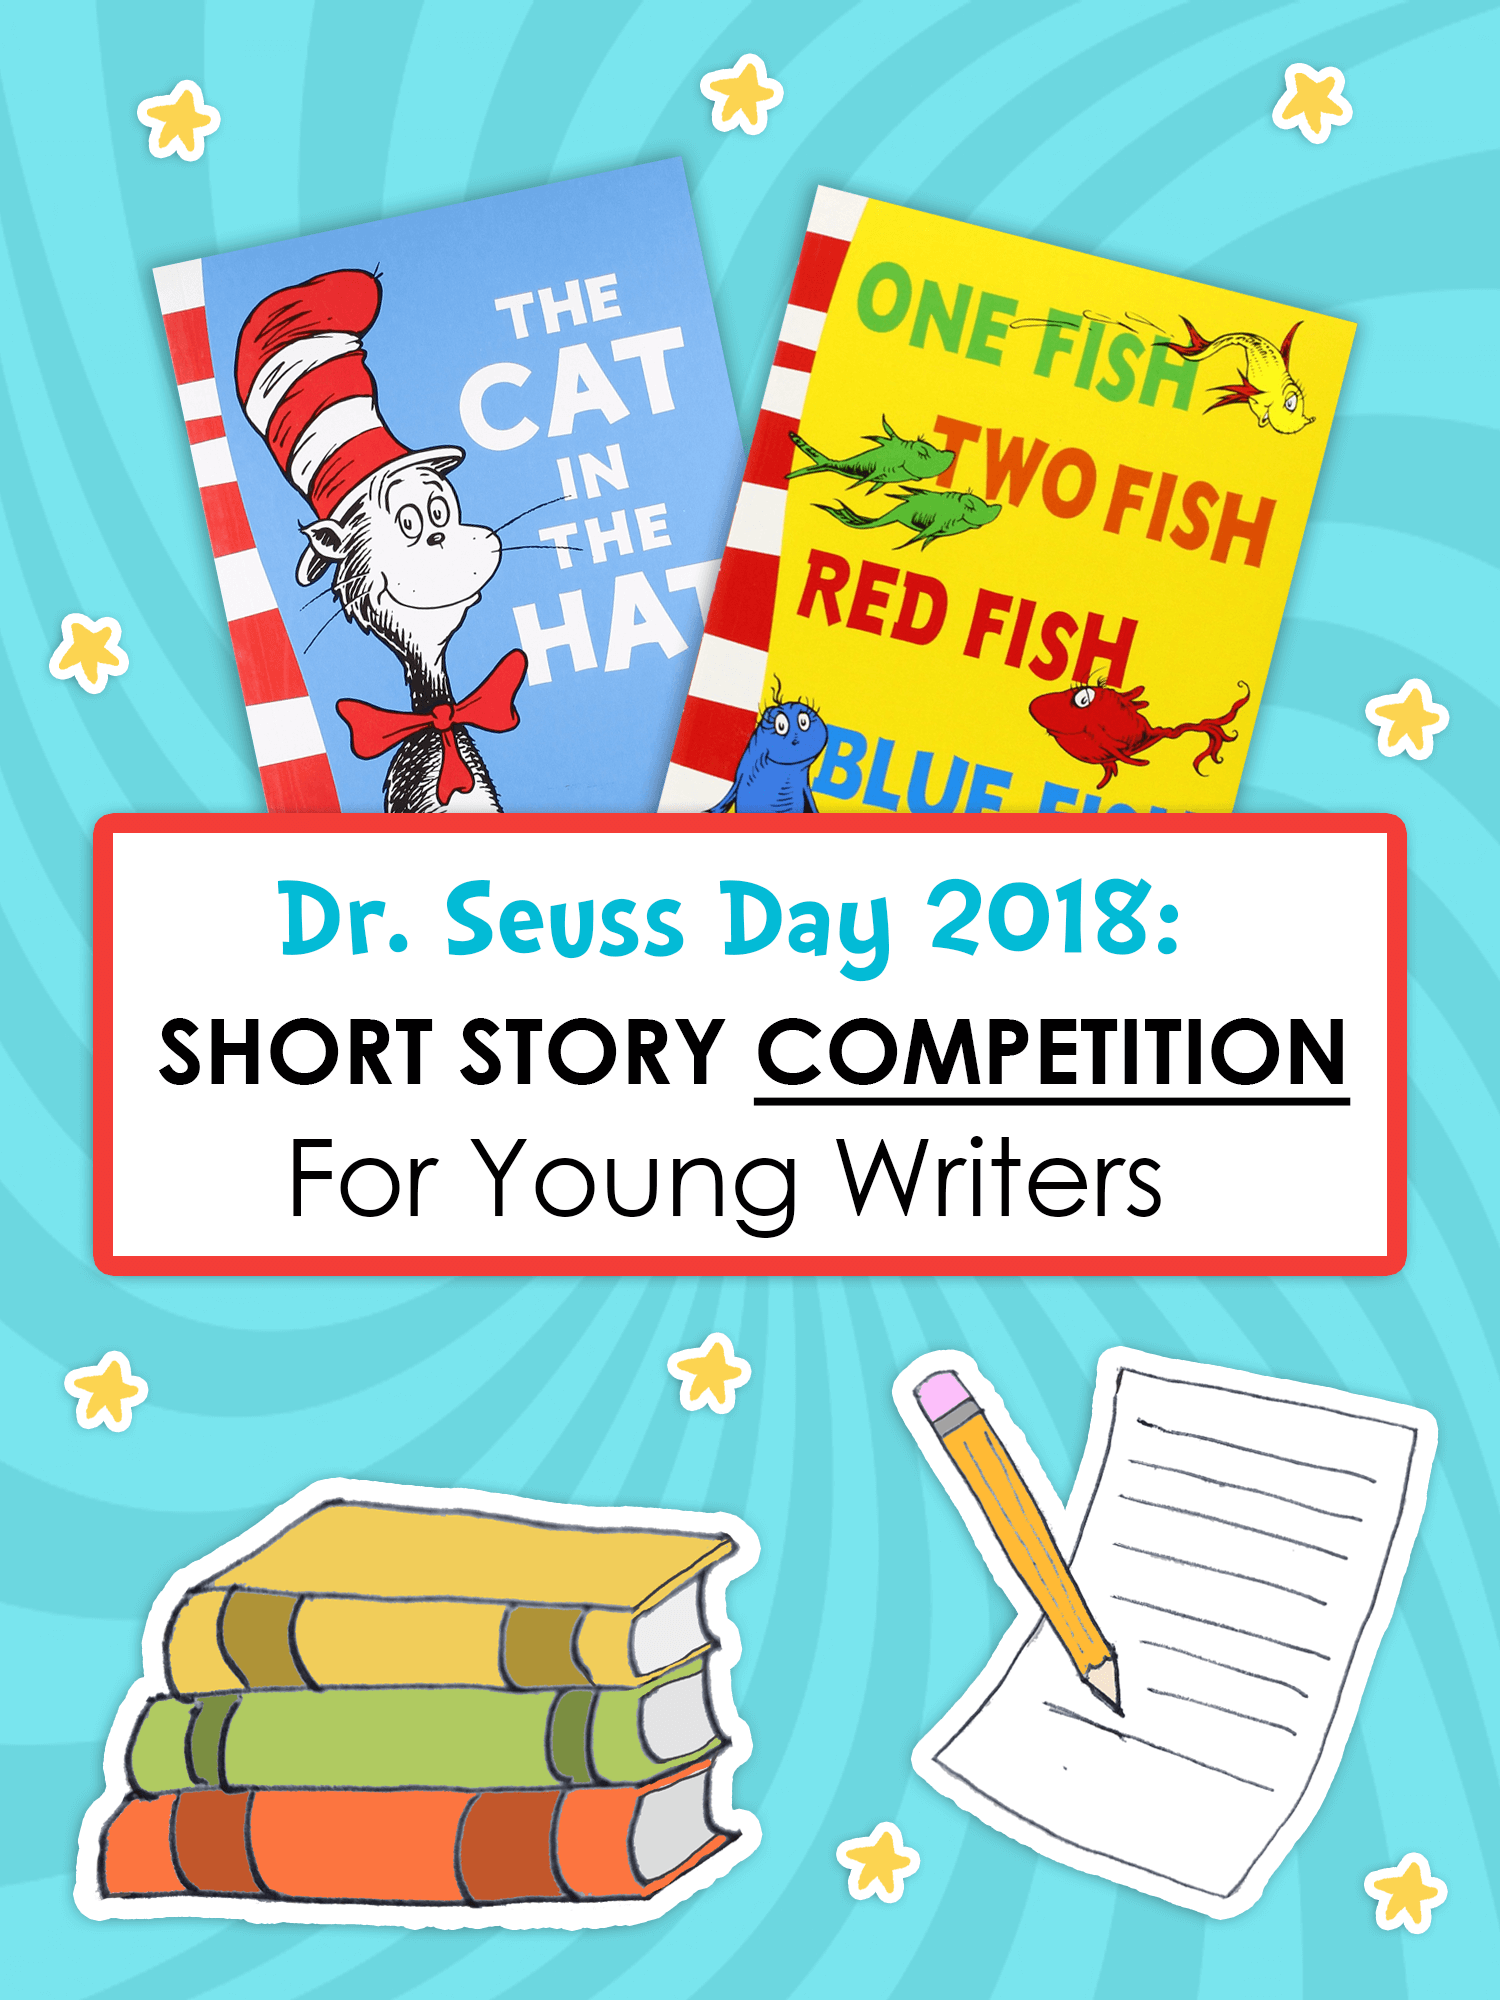 write a short story competition for young writers dr. Seuss day 2018